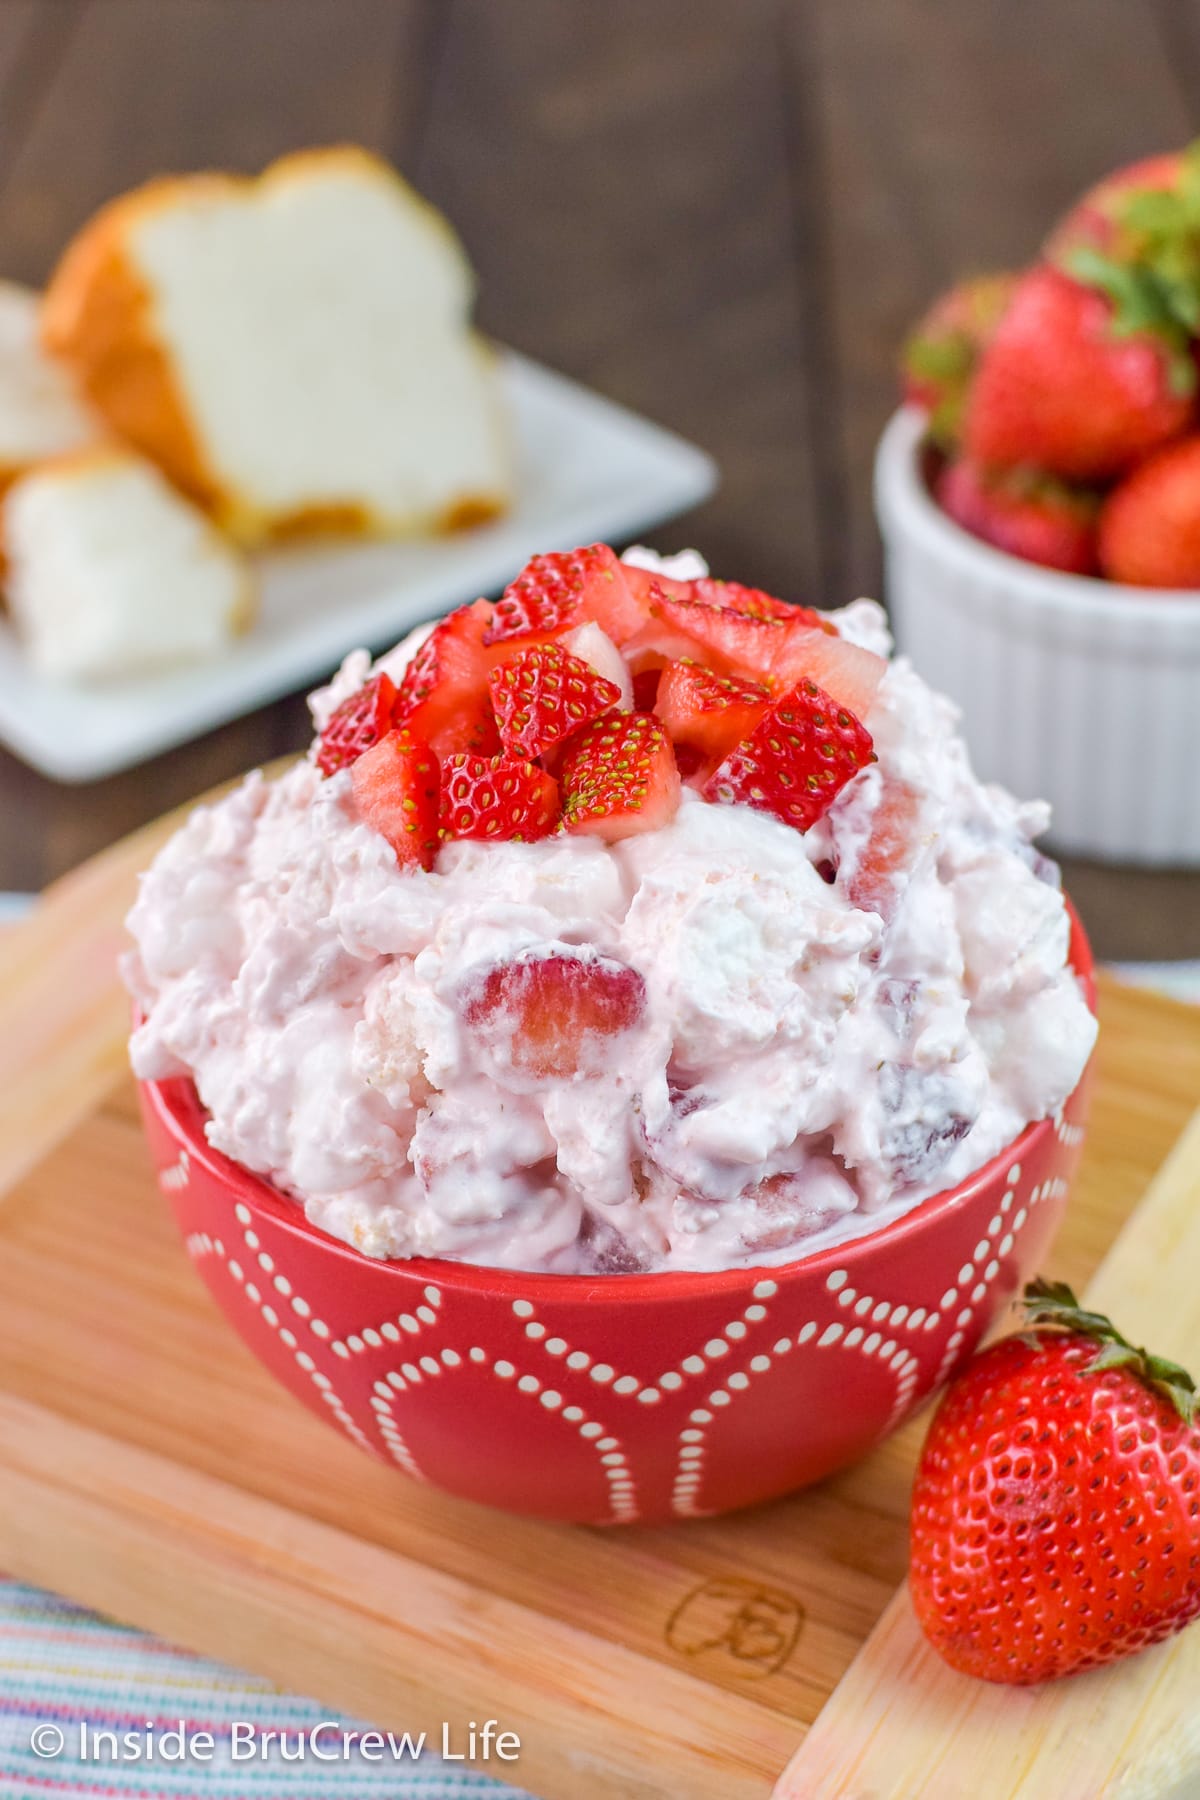 A red bowl filled with strawberry fluff salad and topped with fresh berries.